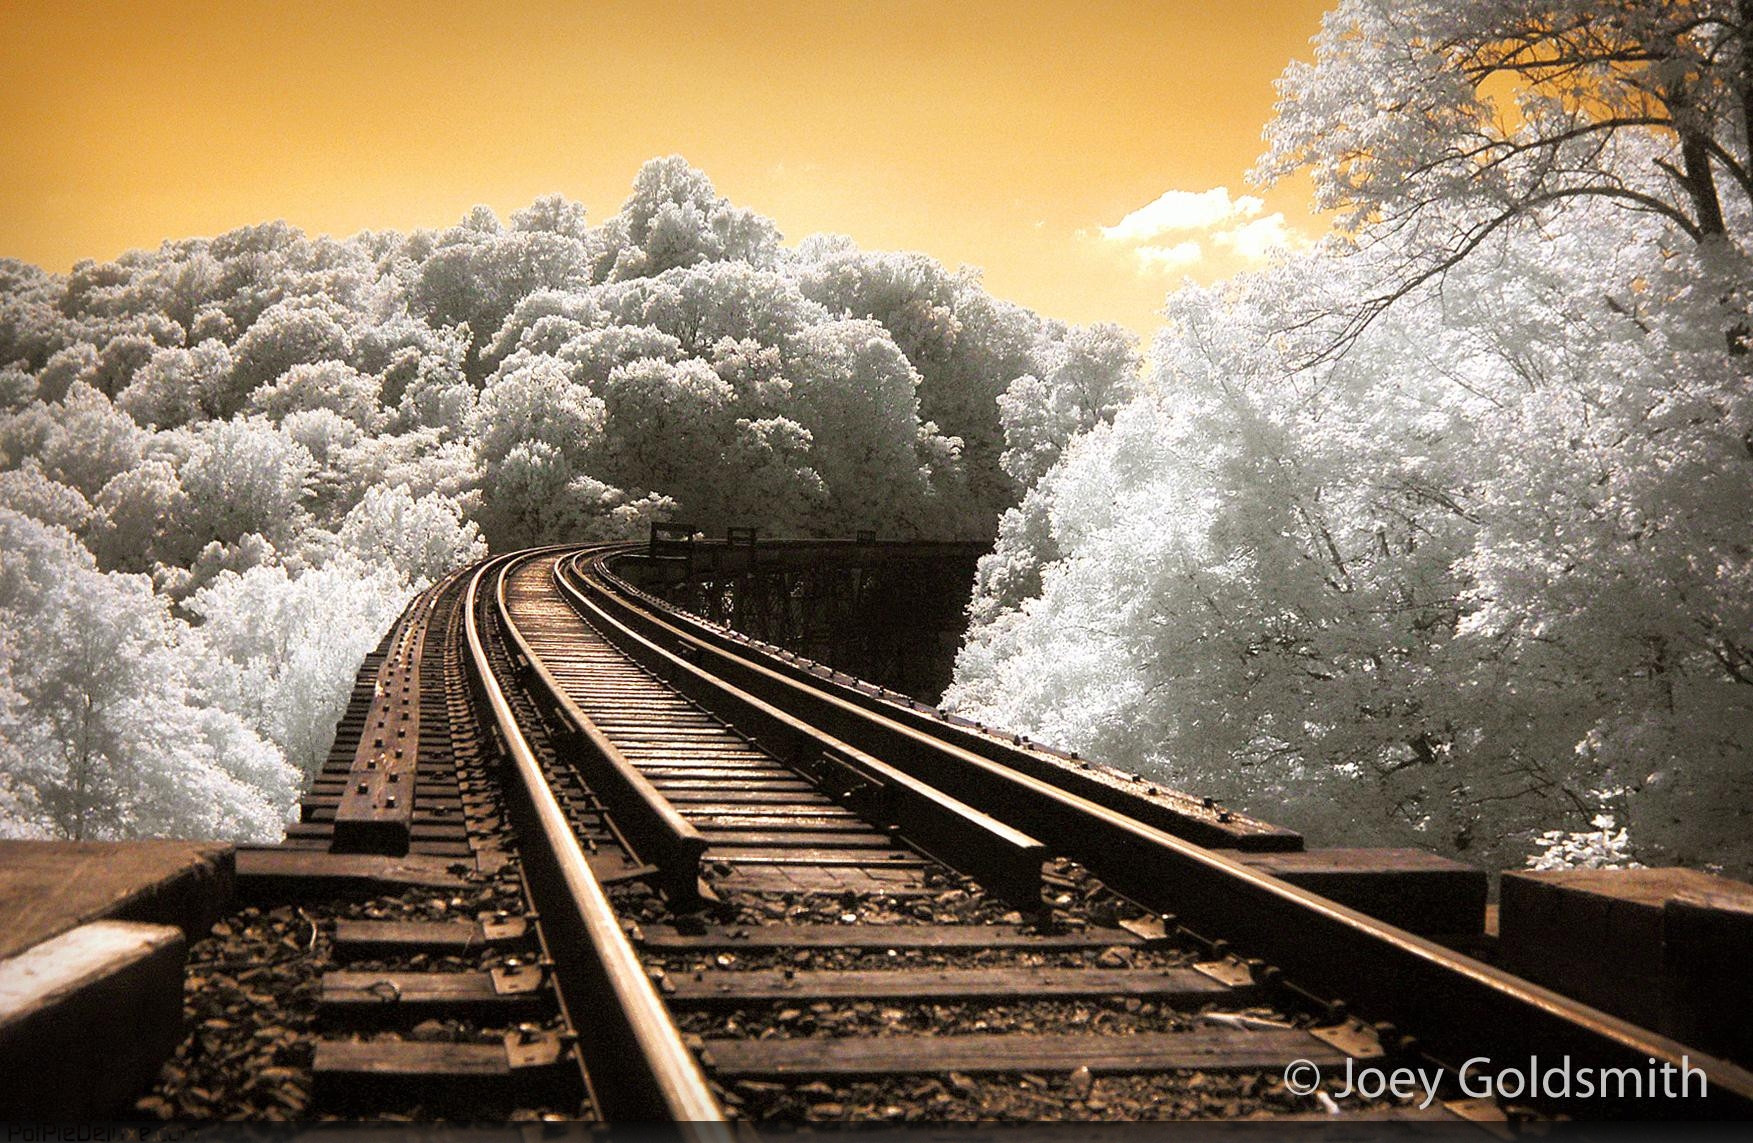 Empty Abandoned Train Tracks In A Rural Area Stock Photo Background, Ahead  Of The Railroad Tracks, Hd Photography Photo, Plant Background Image And  Wallpaper for Free Download